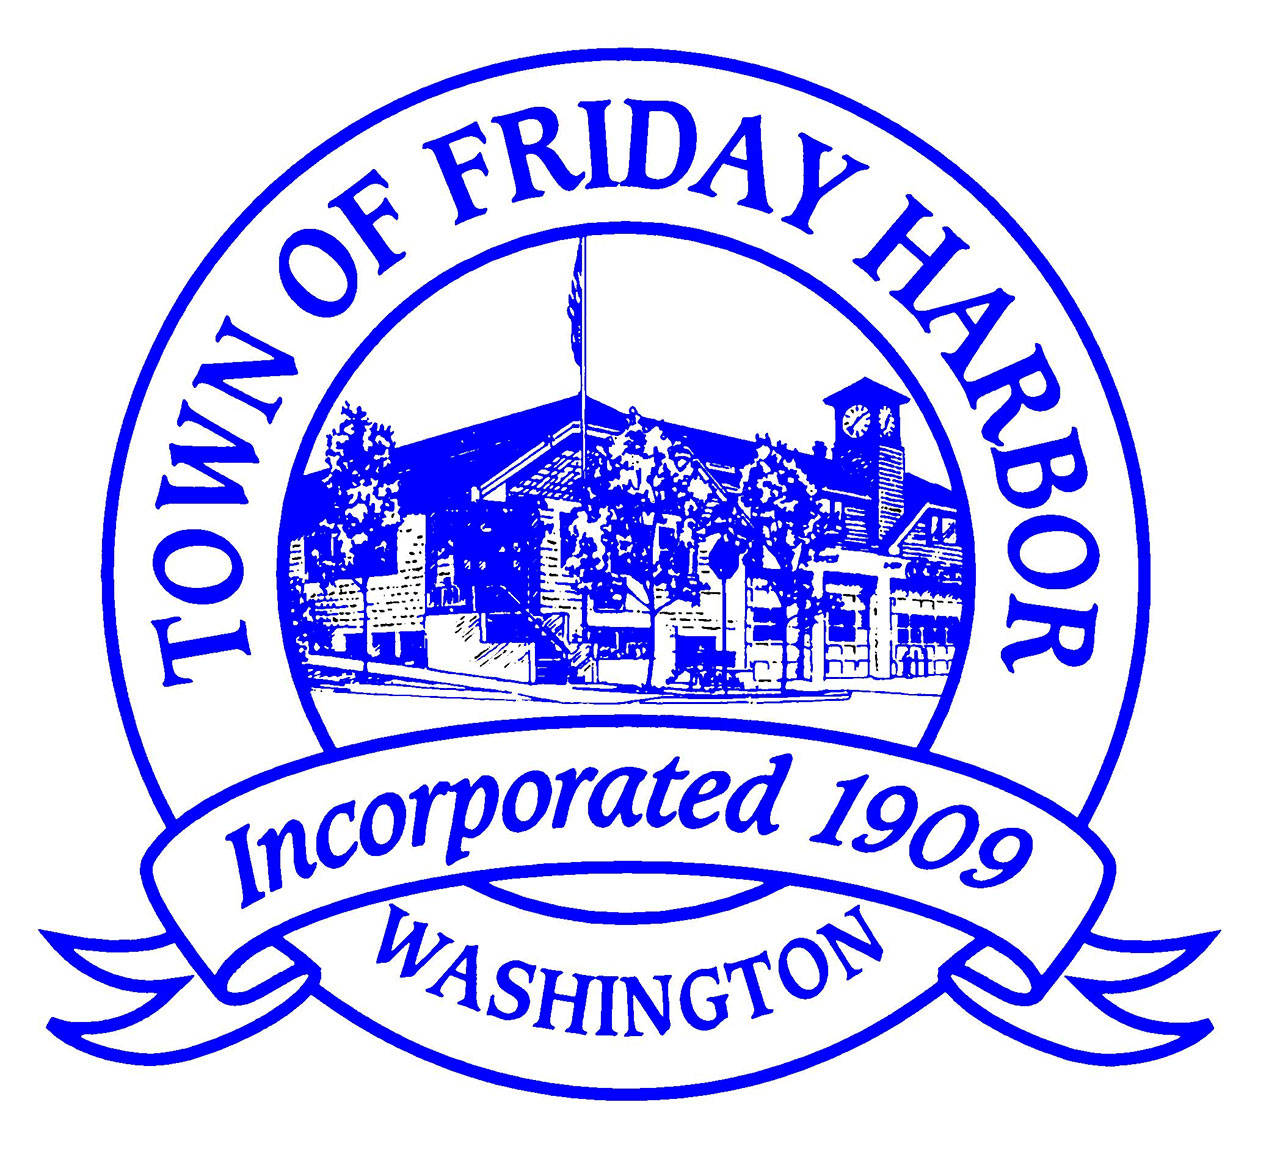 Peter Lane appointed to Friday Harbor Arts Commission